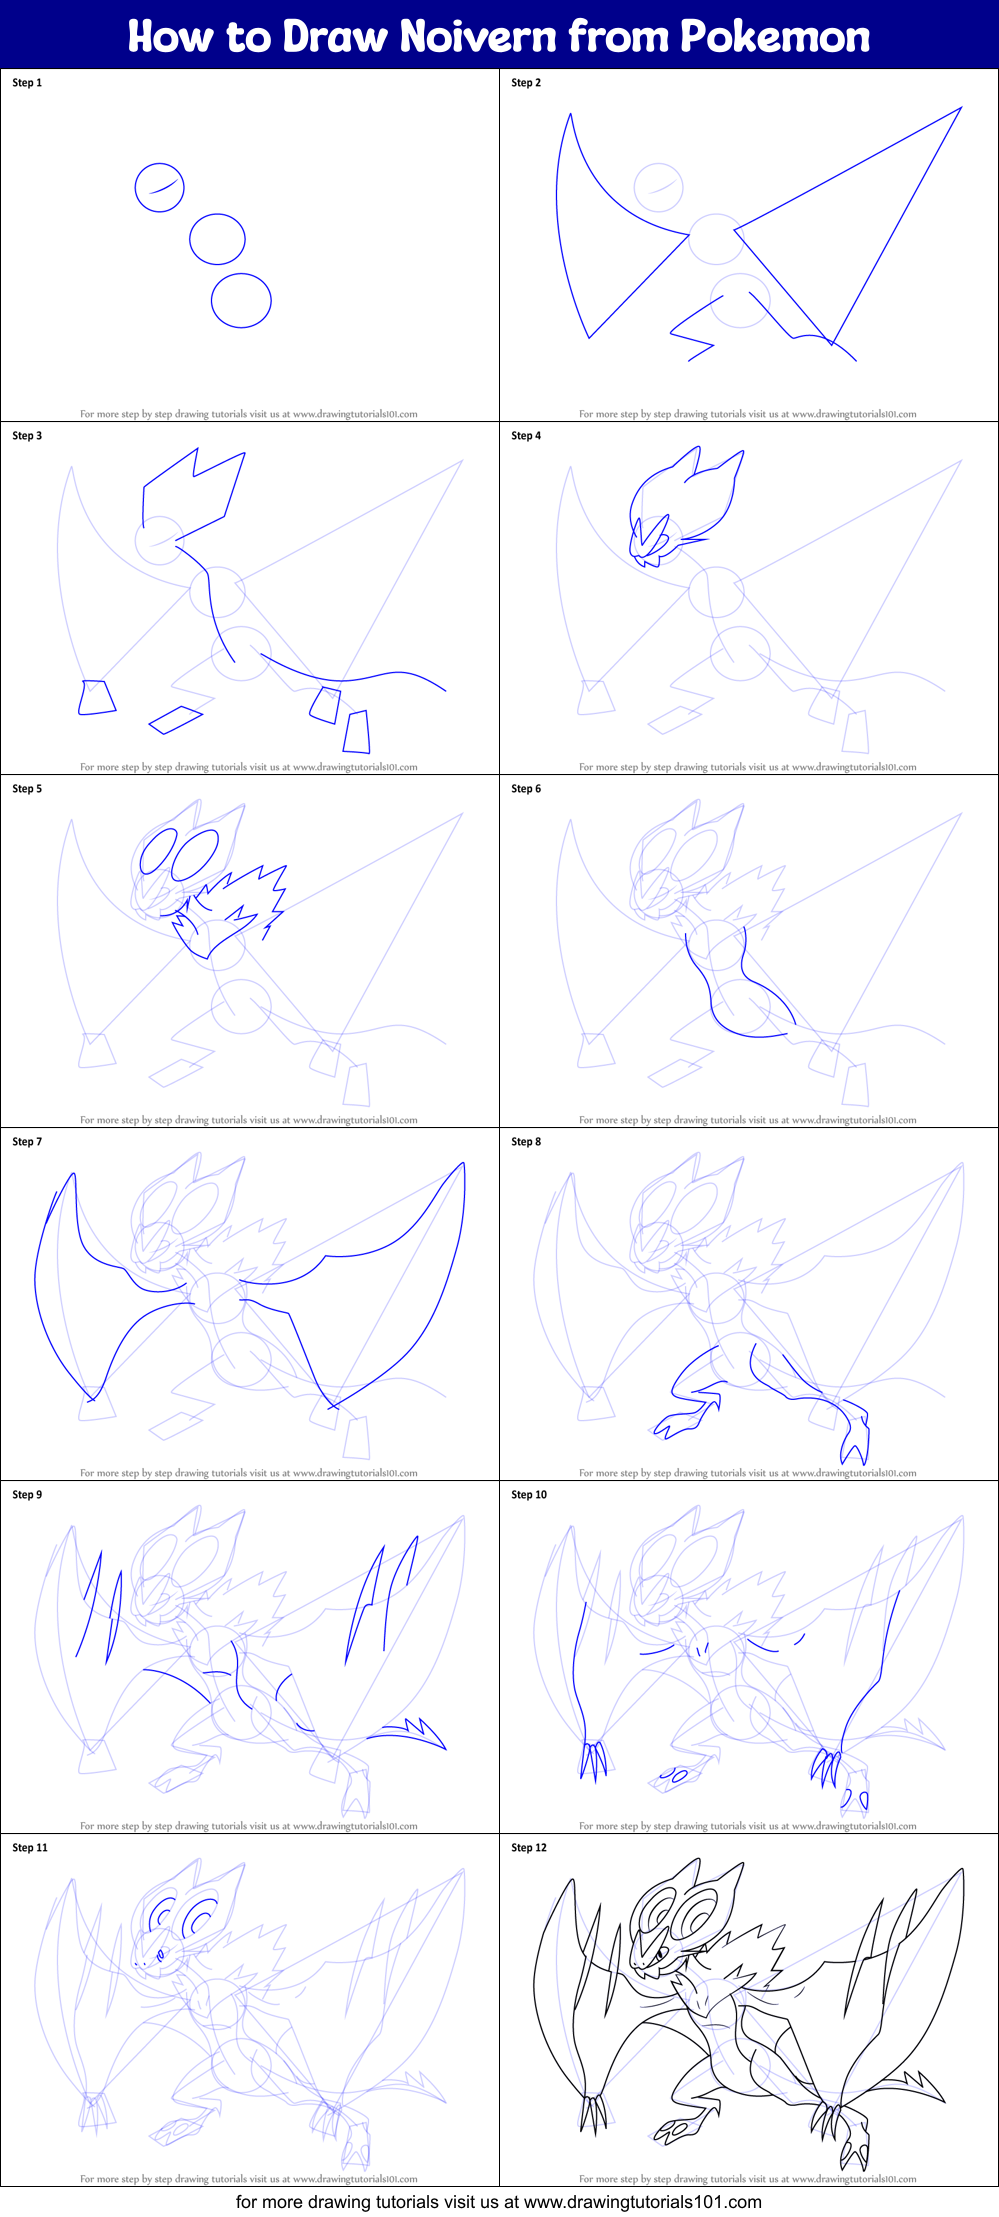 Download How to Draw Noivern from Pokemon printable step by step drawing sheet : DrawingTutorials101.com